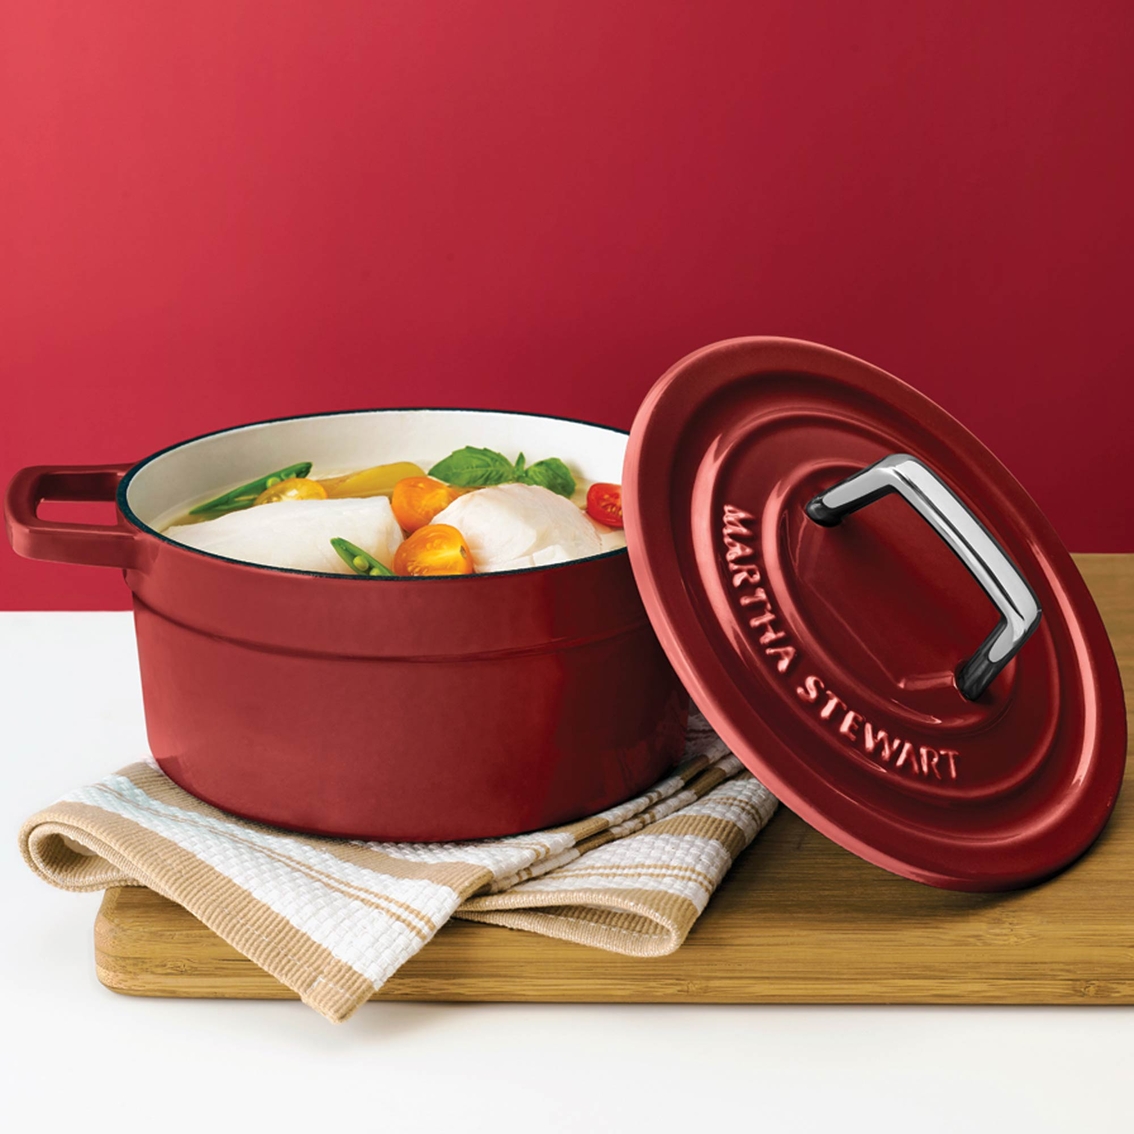 martha-stewart-cast-iron-pot-because-stainless-steel-pans-and-pots